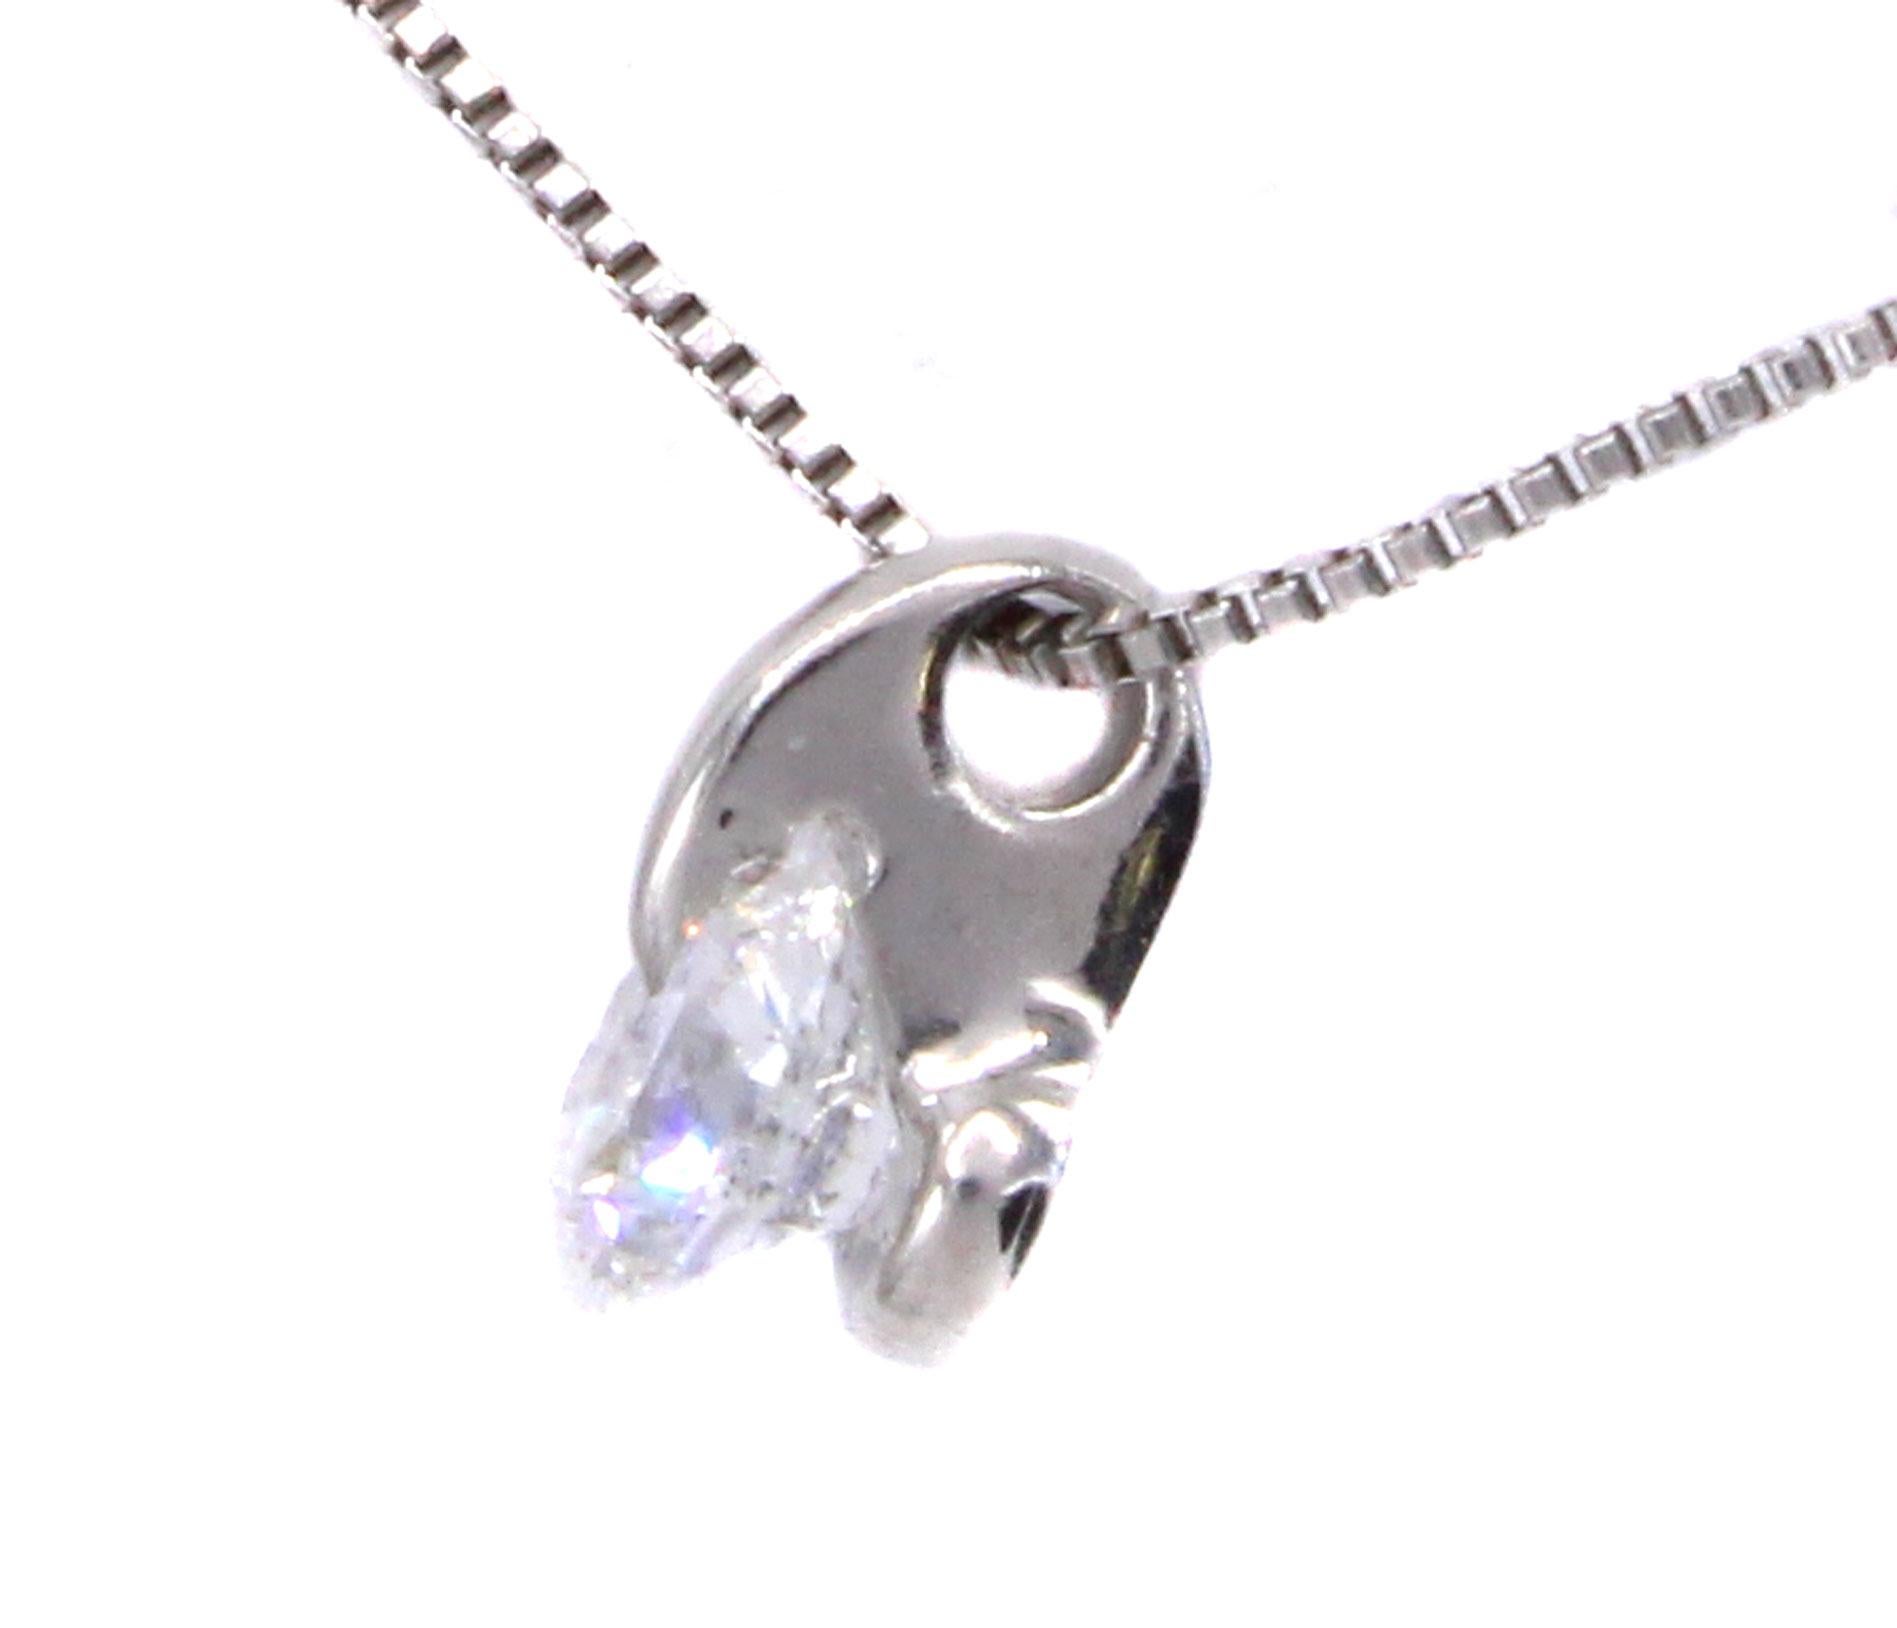 An extremely white and bright round brilliant cut diamond is uniquely set in this platinum handcrafted pendant necklace. With a platinum curved claw extending to the table of the diamond which is securely held in a cub, the diamond shows its full